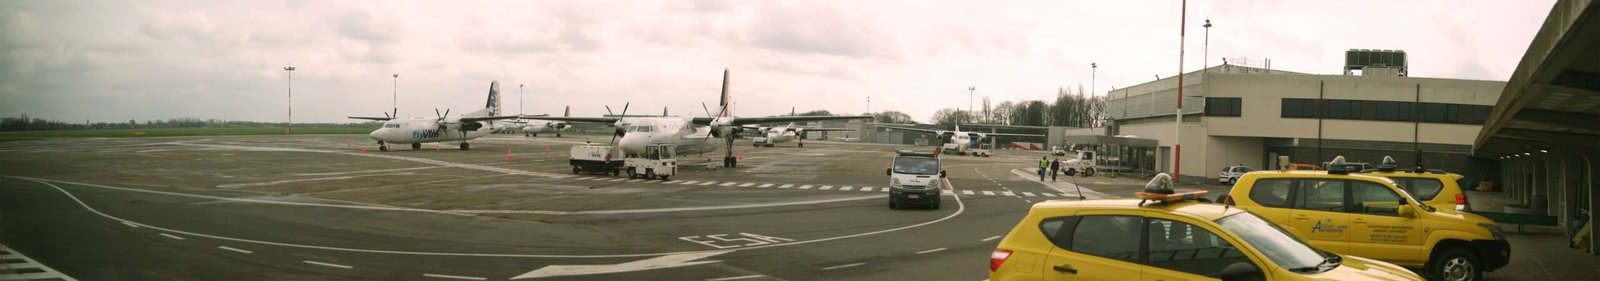 A panoramic photo of Deurne airport, actually Antwerp airport. Ghost was invited to brunch at the airport cafeteria and took the opportunity to take this photo through the window. It's a Saturday morning, and at the weekend there's virtually no activity at this small airport, which is why the tarmac is so quiet and deserted.